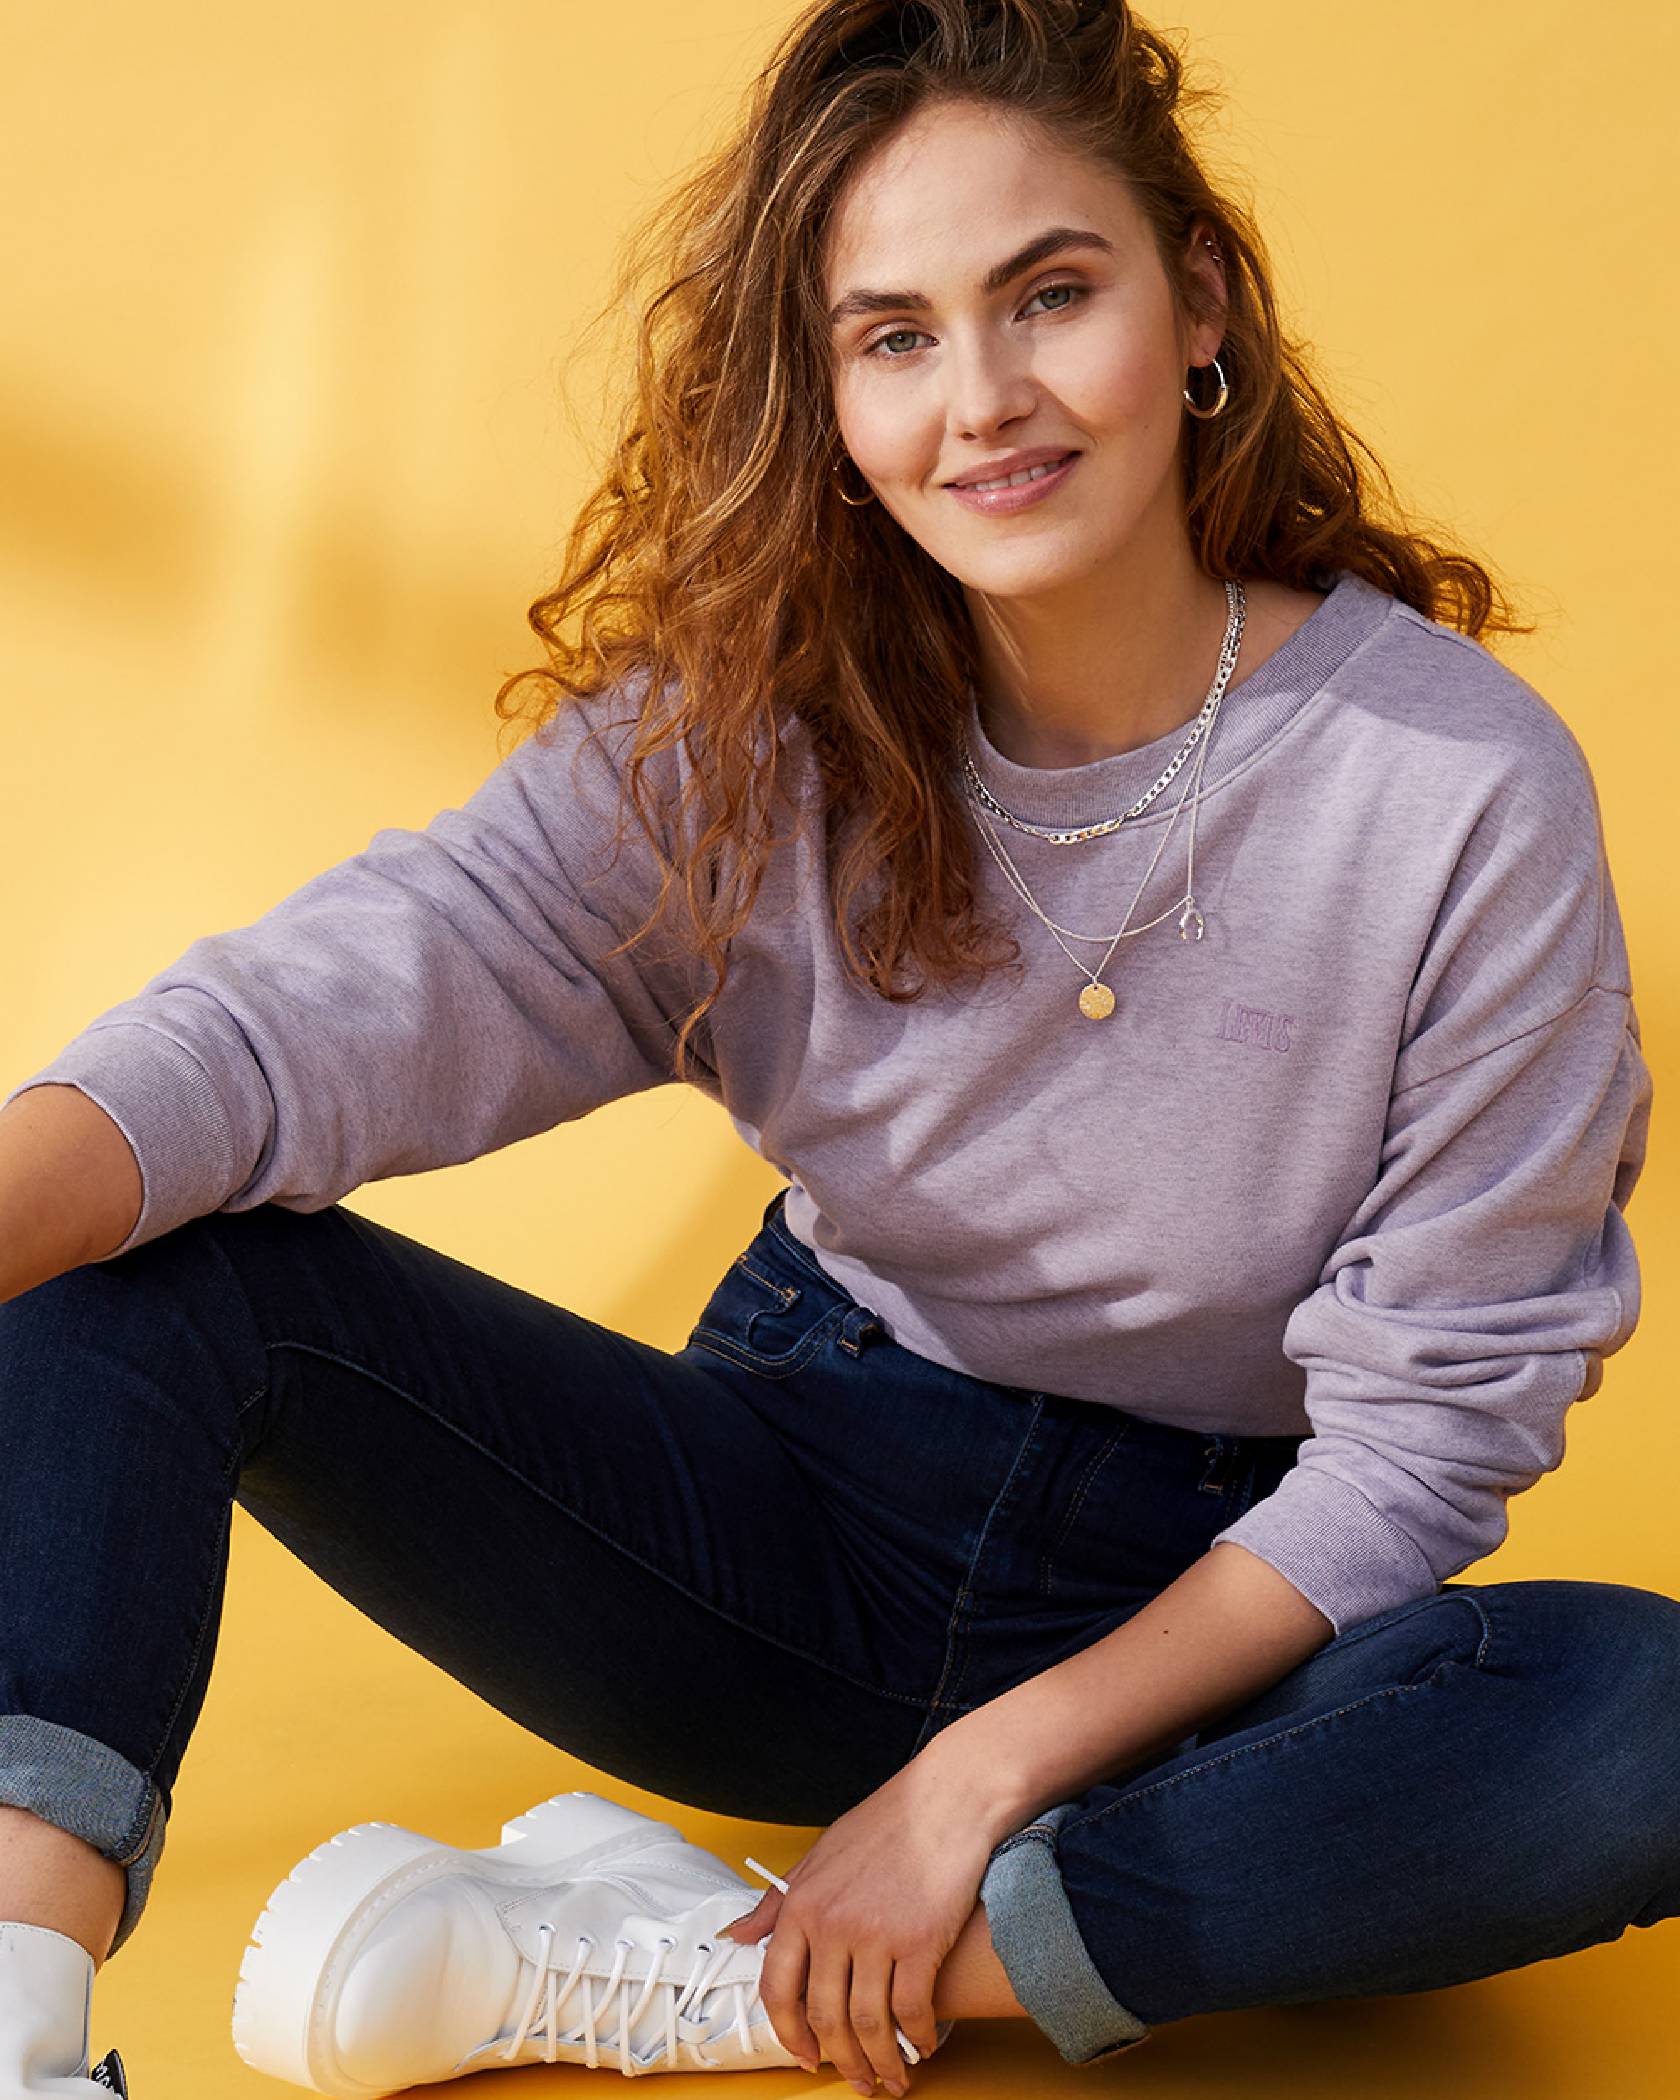 Image of model Elena Carrière sitting on the floor that has a yellow background, wearing a purple sweatshirt, dark wash denim jeans, and white shoes while her left arm holds her left ankle.